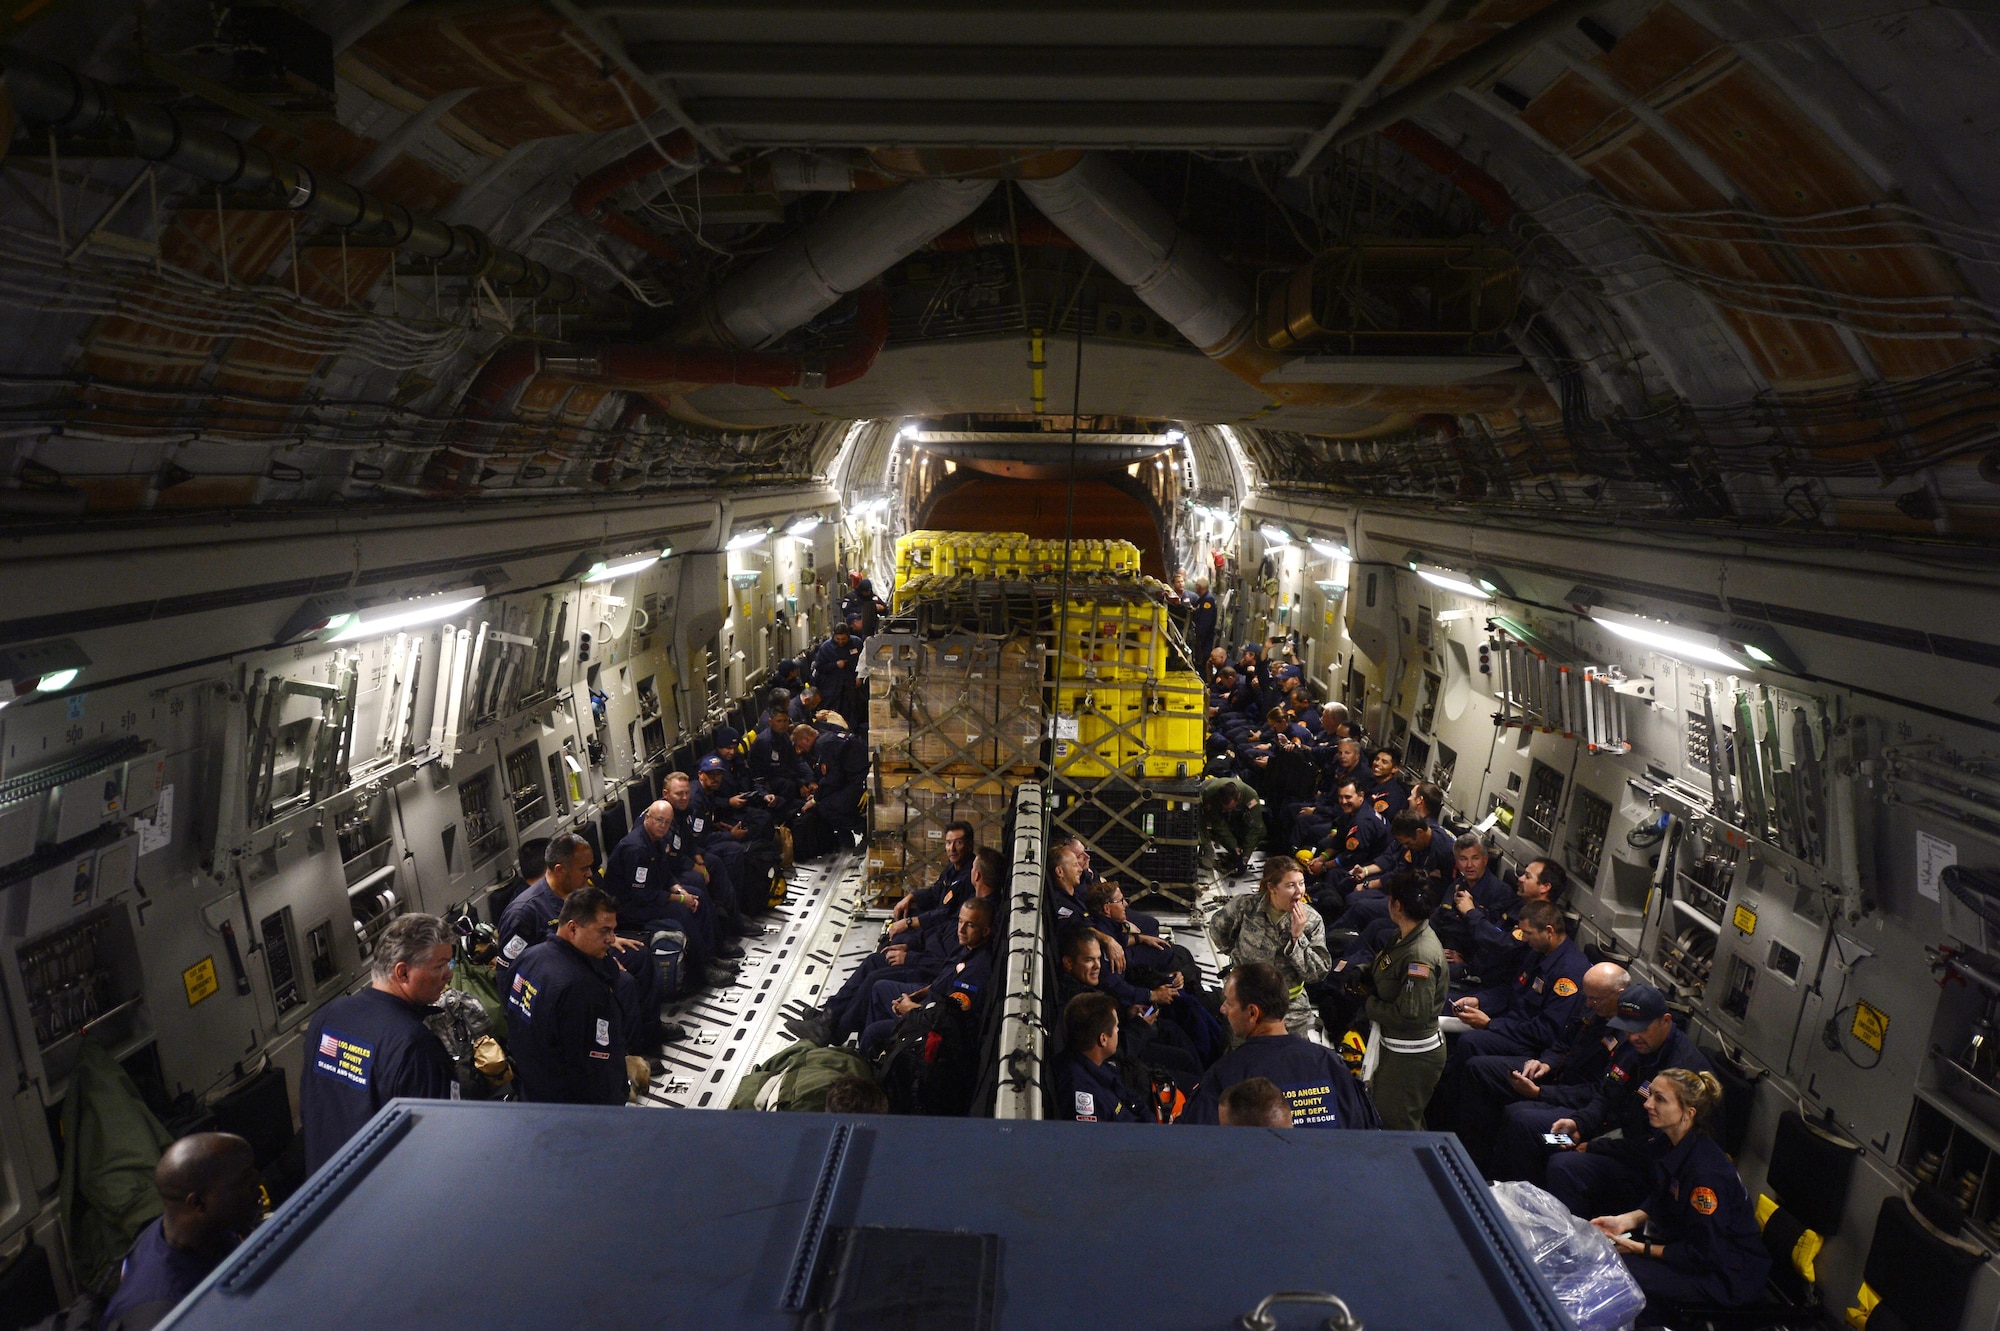 Service members load relief supplies for victims of the Nepal earthquake into a C-17 Globemaster III from Joint Base Charleston, S.C., at March Air Force Base, Calif., April 26, 2015. The U.S. Agency of International Development's relief cargo included eight pallets, 59 Los Angeles County Fire Department personnel and five search and rescue dogs. (U.S. Air Force photo/Airman 1st Class Taylor Queen)